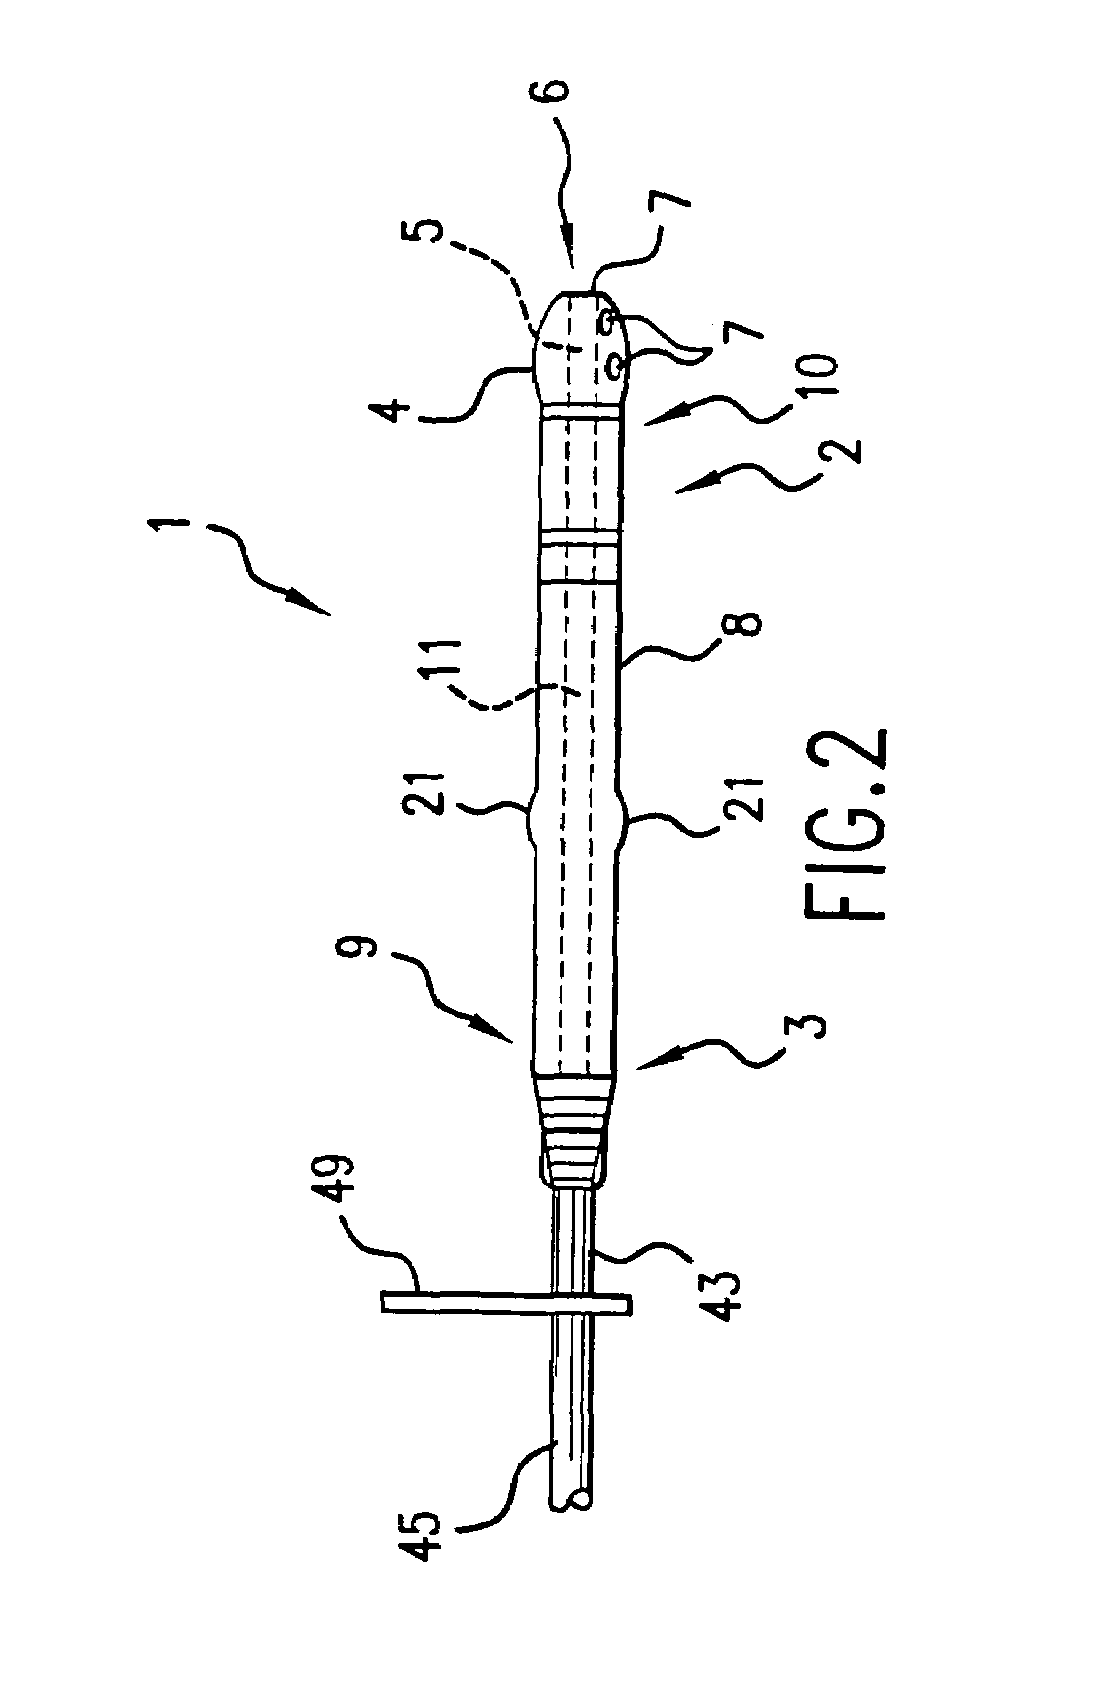 Device, system, kit or method for collecting effluent from an individual